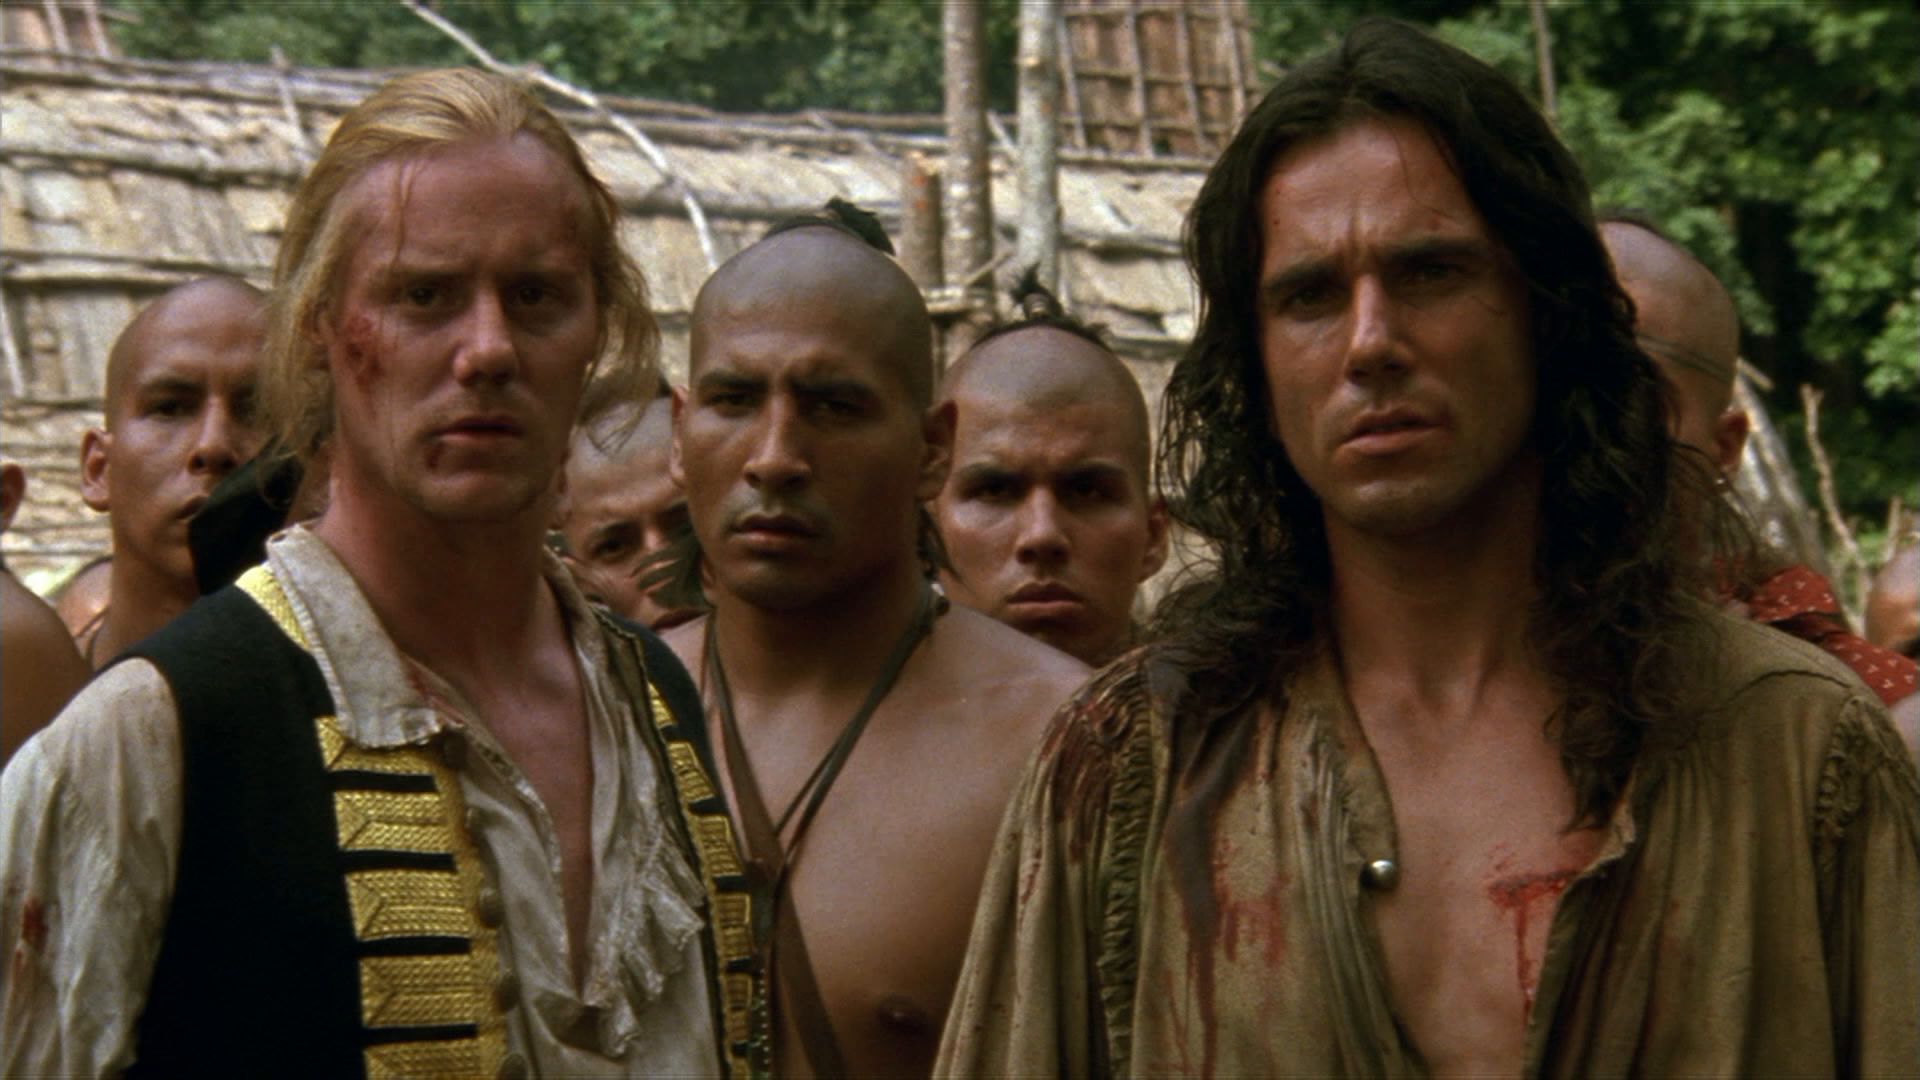 A still from The Last of the Mohicans